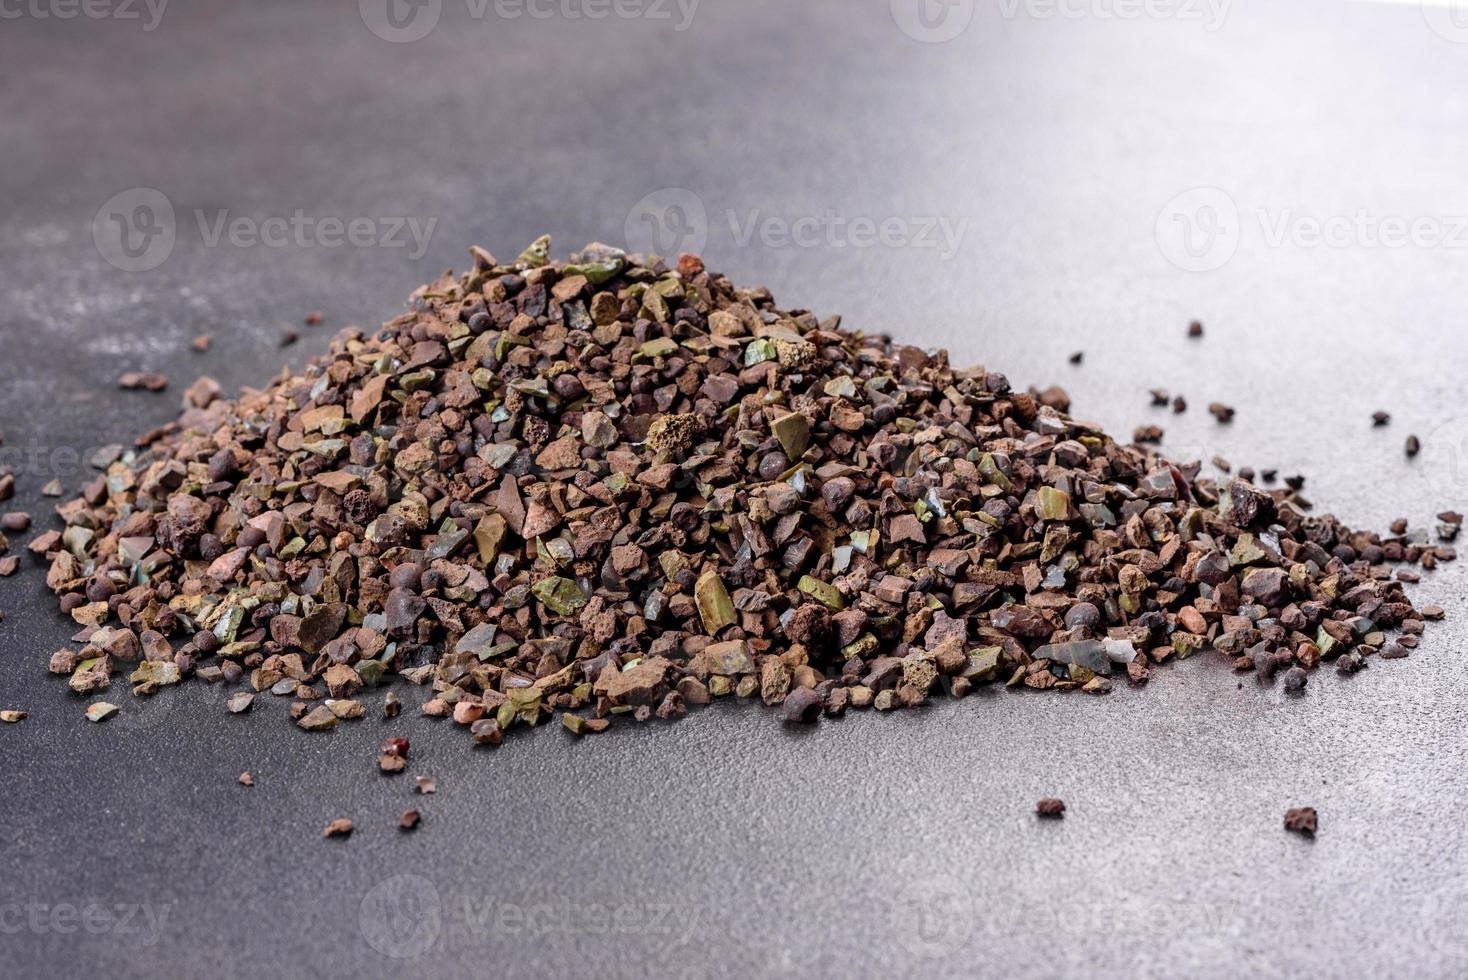 Crushed stone abstract textured background photo